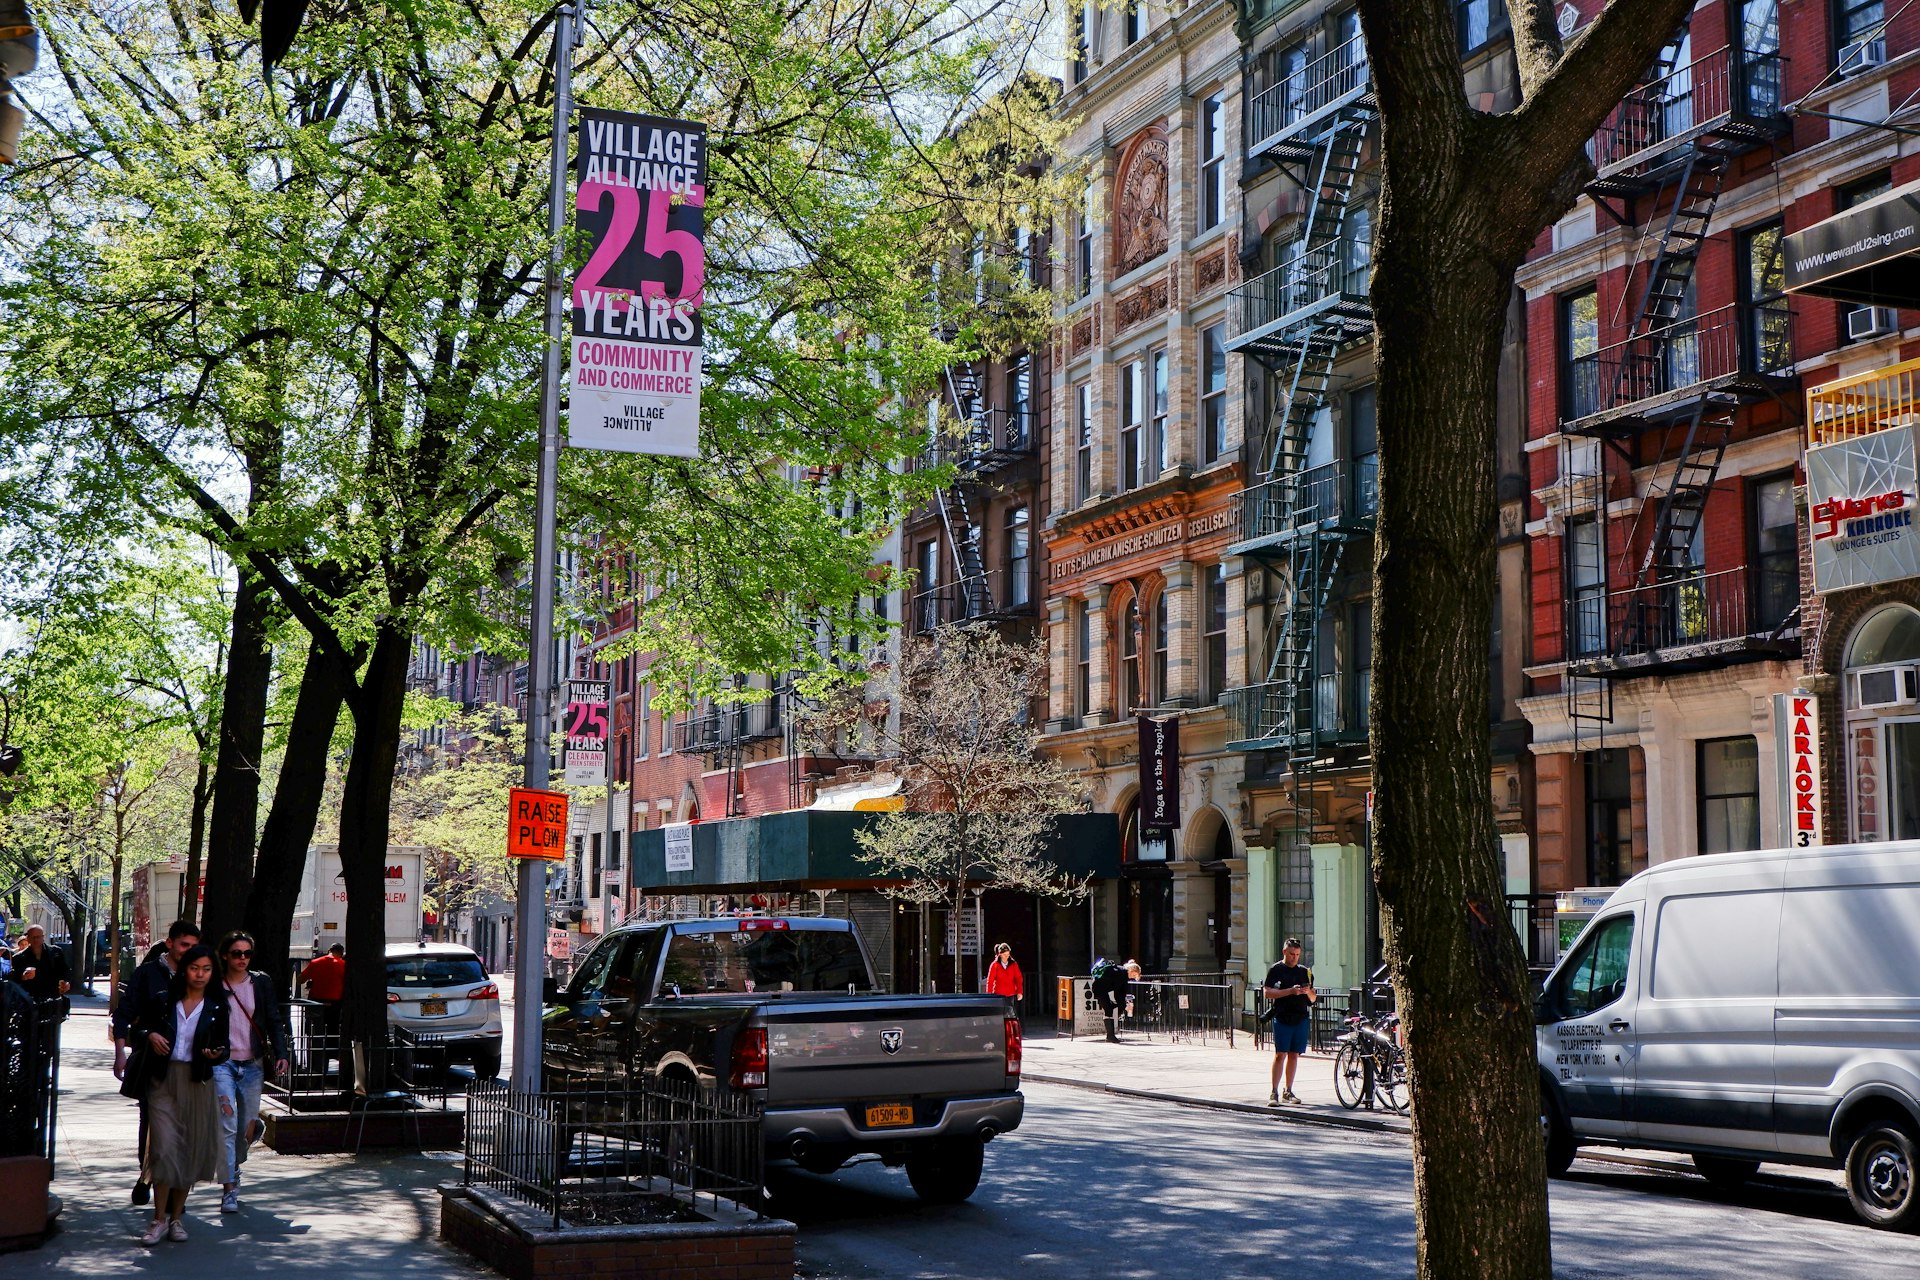 St Marks Place, the main street in the famous East Village of New York City